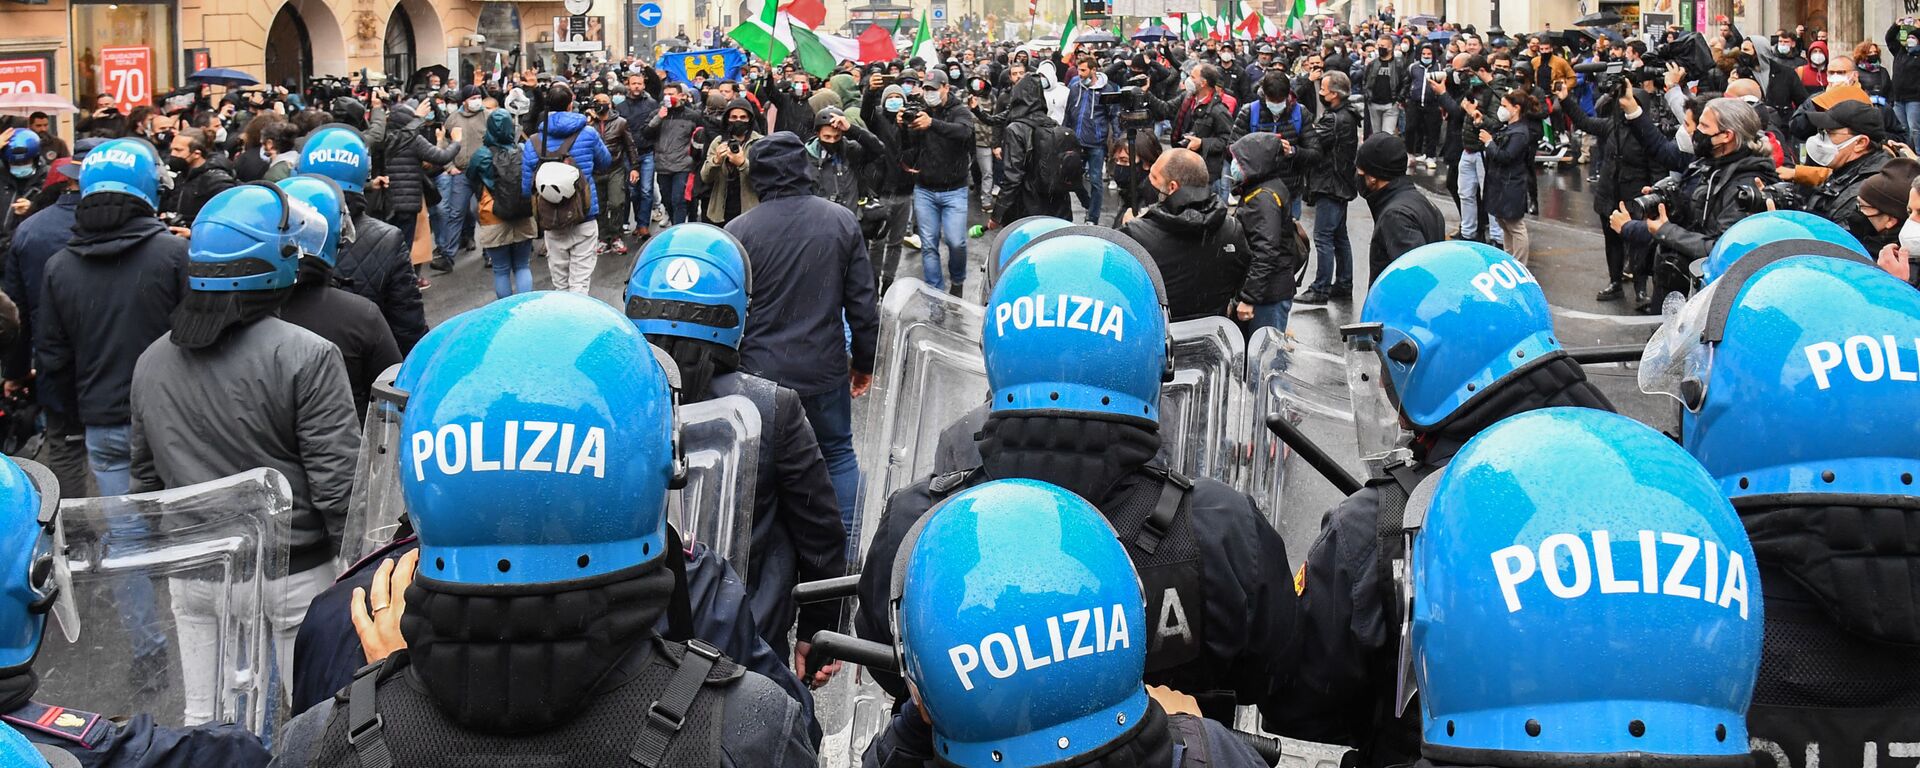 Protesters (Rear) face a line of anti-riot Police officers on April 12, 2021 on Piazza San Silvestro in central Rome during a demonstration of restaurant owners and workers, entrepreneurs and small businesses owners, demanding the easing of lockdown restrictions and financial assistance from the government, during the Covid-19 coronavirus pandemic.  - Sputnik International, 1920